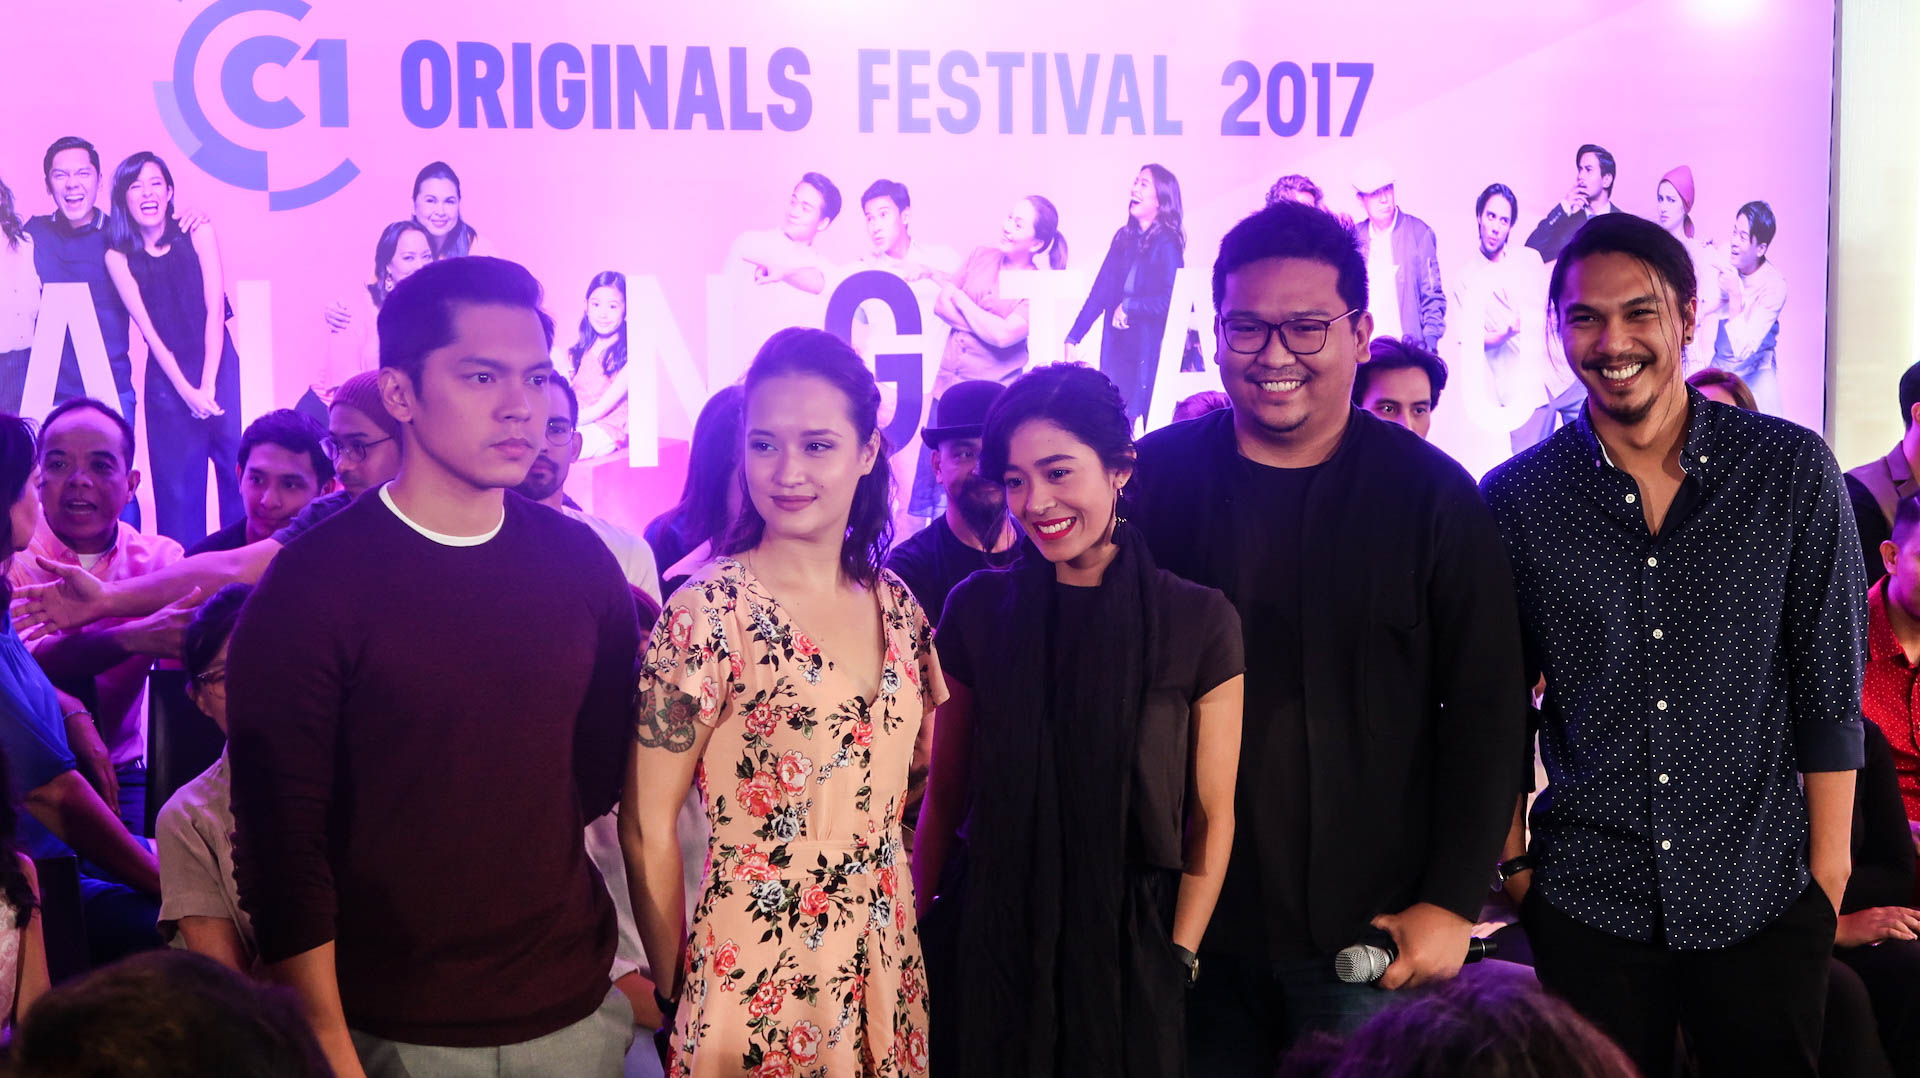 CINEMA ONE ORIGINALS 2017. Carlo Aquino leads the cast of the movie 'Throwback Today' by Joseph Teoxon. All photos by Precious del Valle/Rappler 